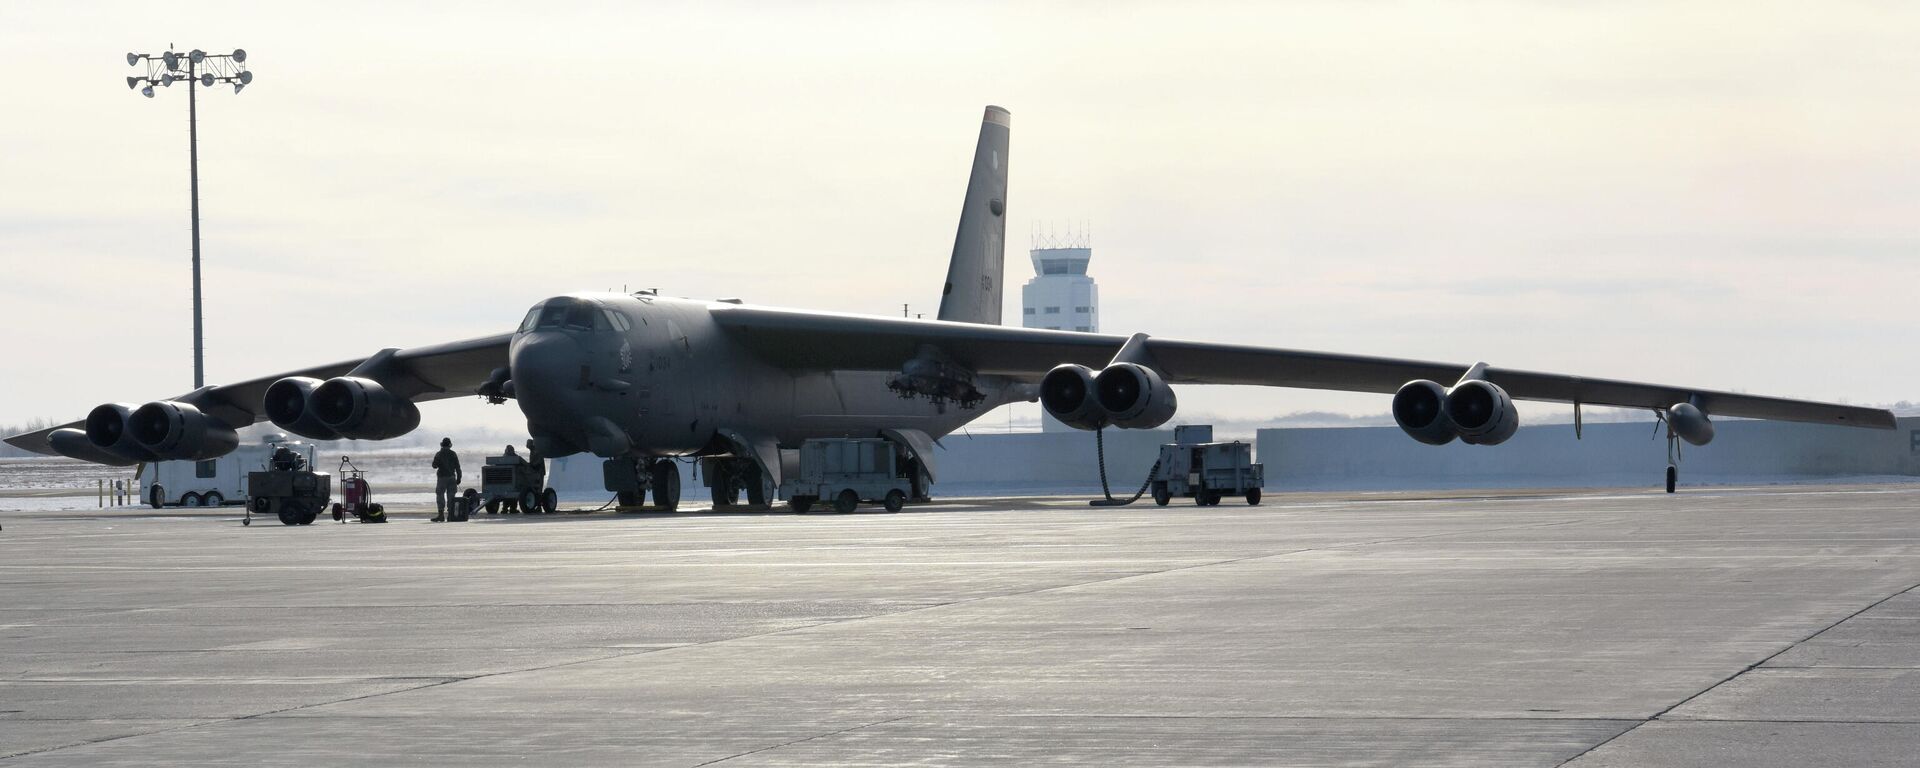 A B-52H Stratofortress sits on the flight line at Minot Air Force Base, North Dakota, Jan. 10, 2019. The B-52’s wingspan stretches 185 feet and weighs approximately 185,000 pounds empty with maximum takeoff weight of 488,000 pounds. - Sputnik International, 1920, 13.02.2024